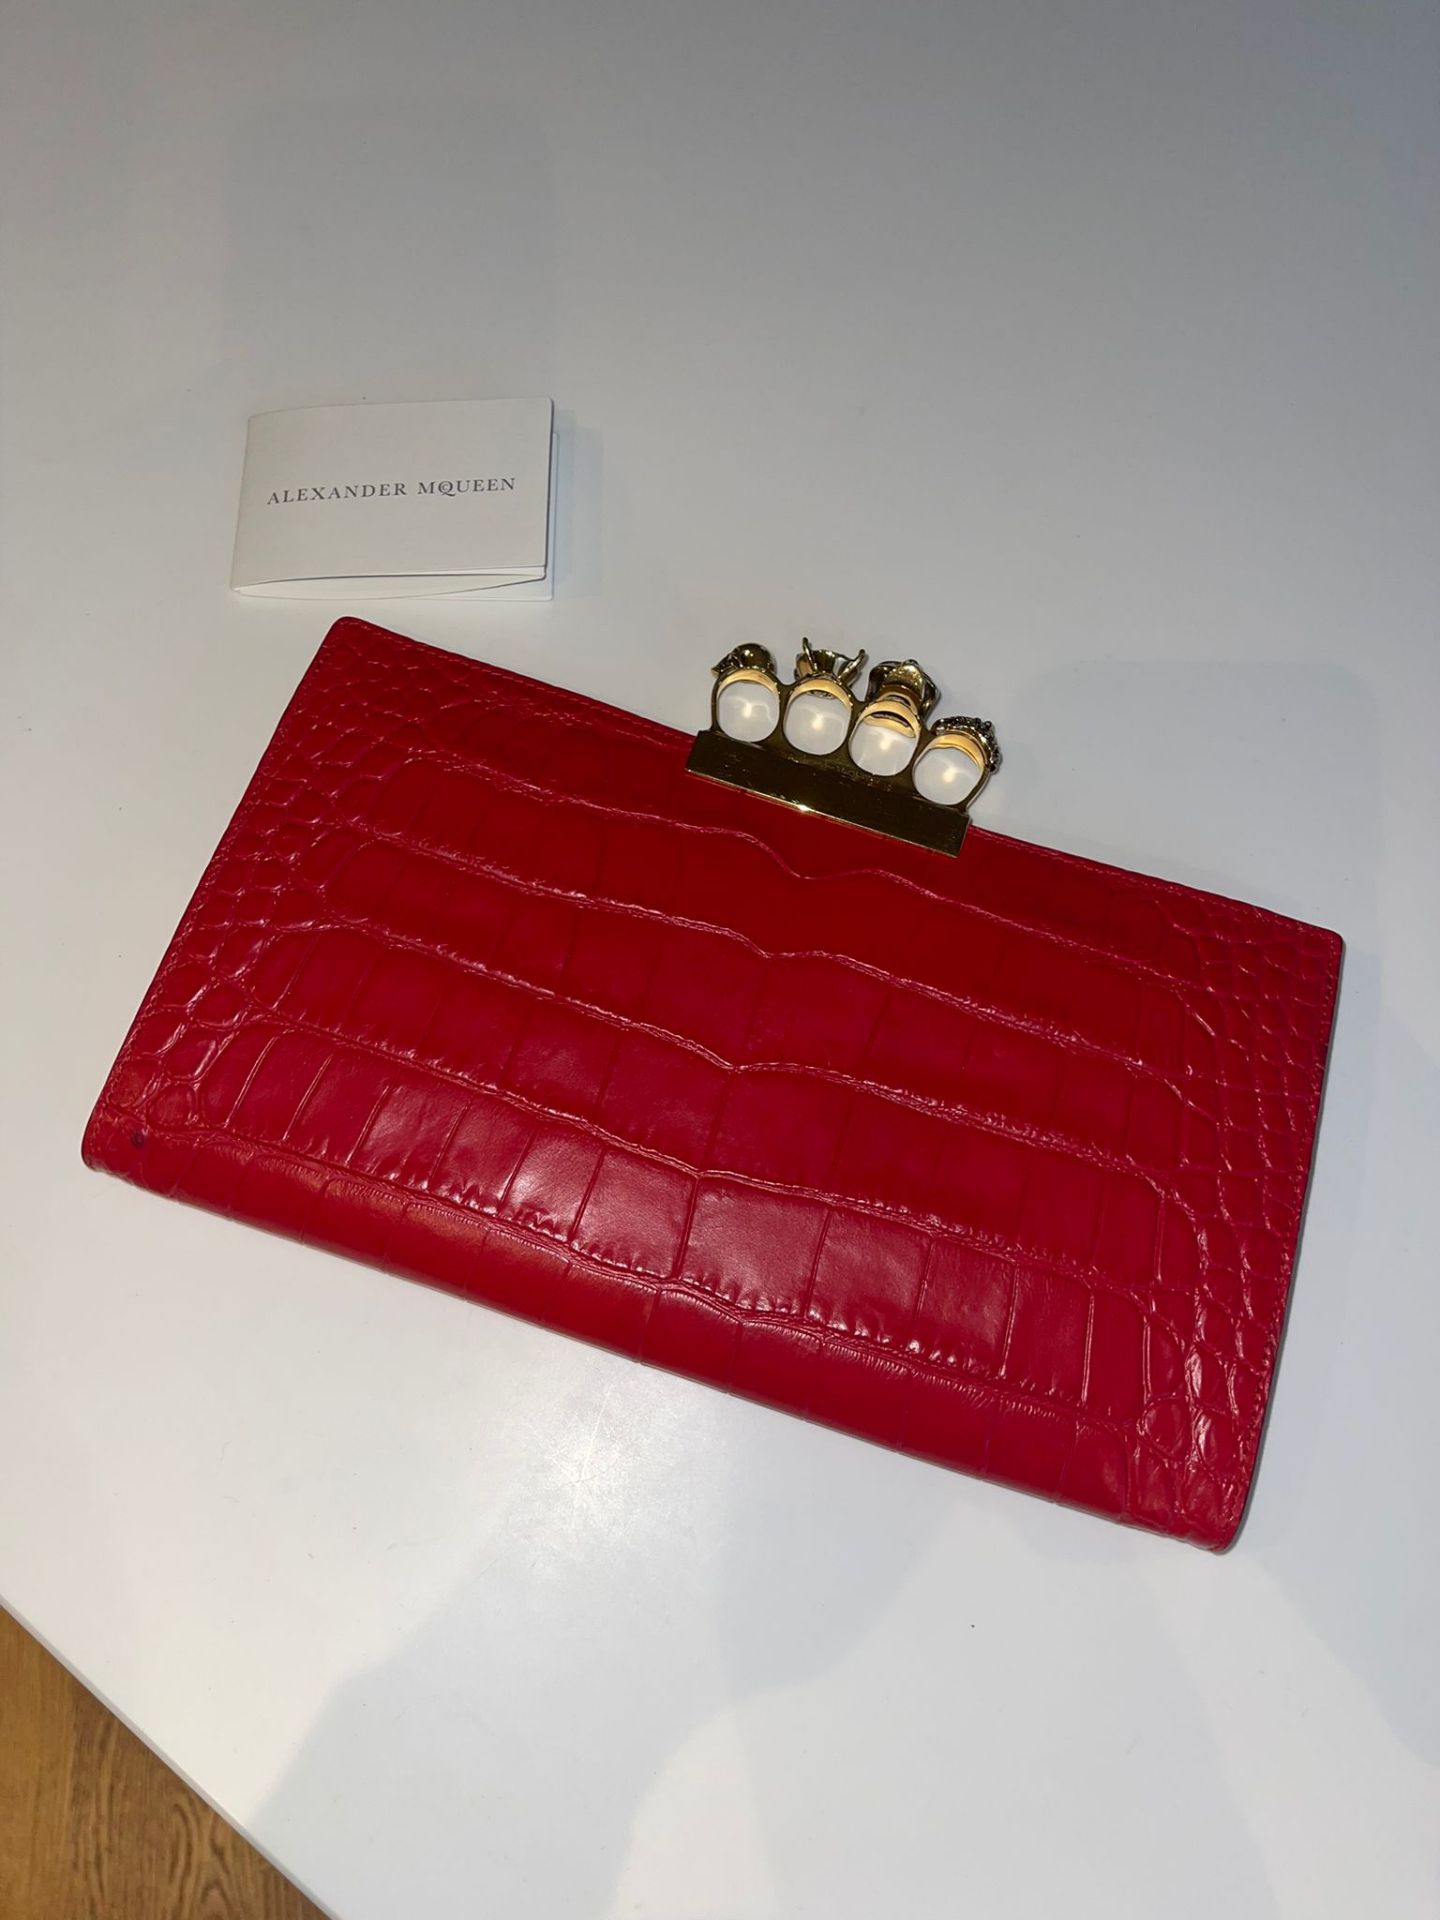 ALEXANDER MCQUEEN Jewellery Red Clutch Bag, RRP £1,450. Crafted as part of the designer’s final - Image 4 of 4